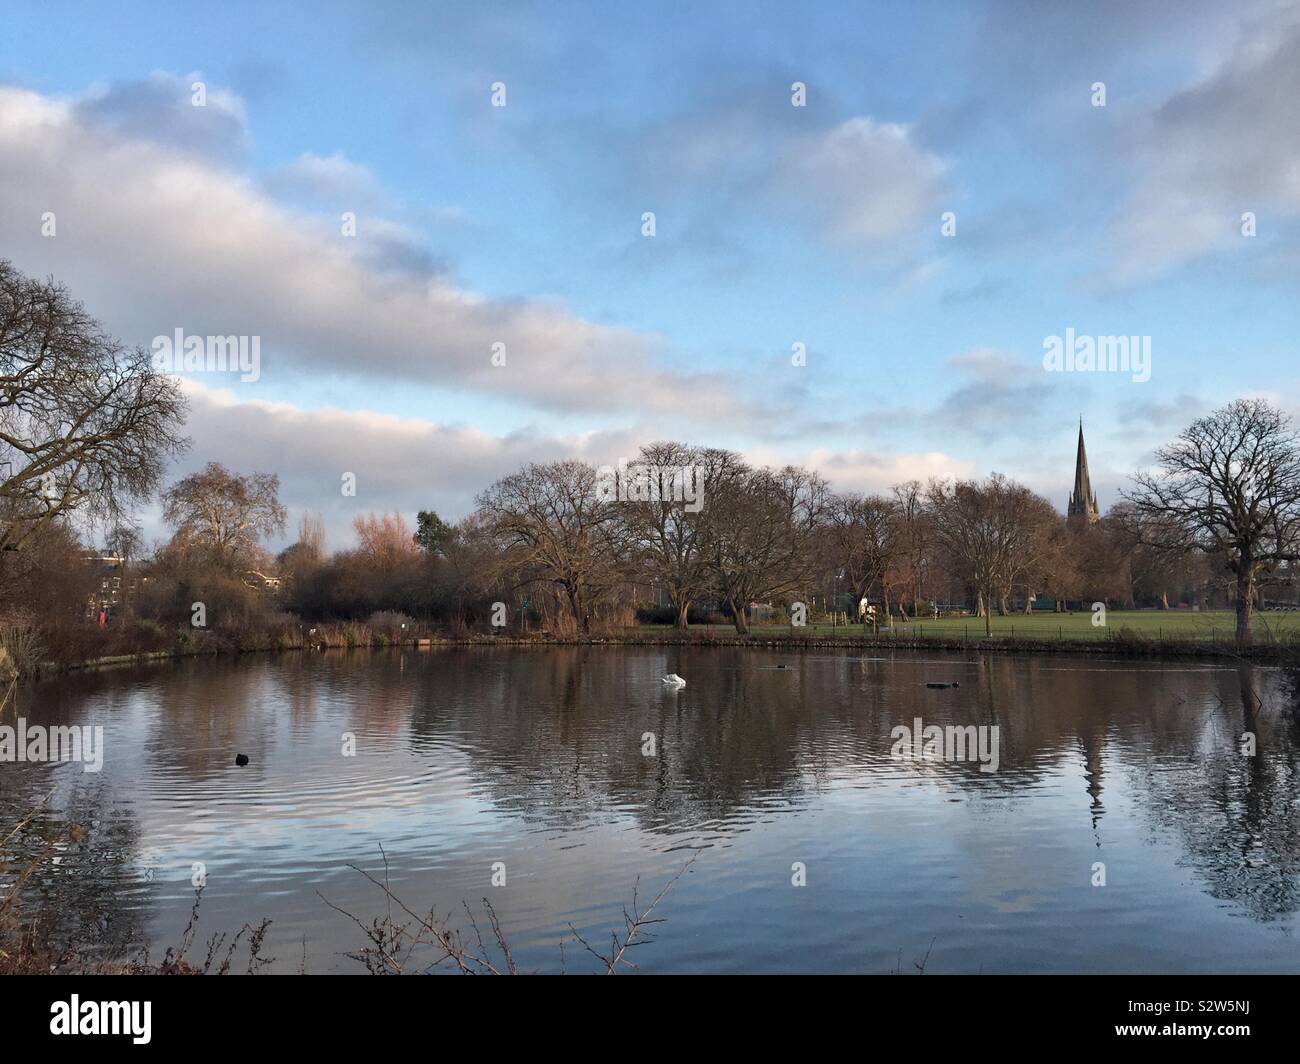 Lake at Clissold park, Stoke newington, North London, Hackney, with Church spire I’m background Stock Photo